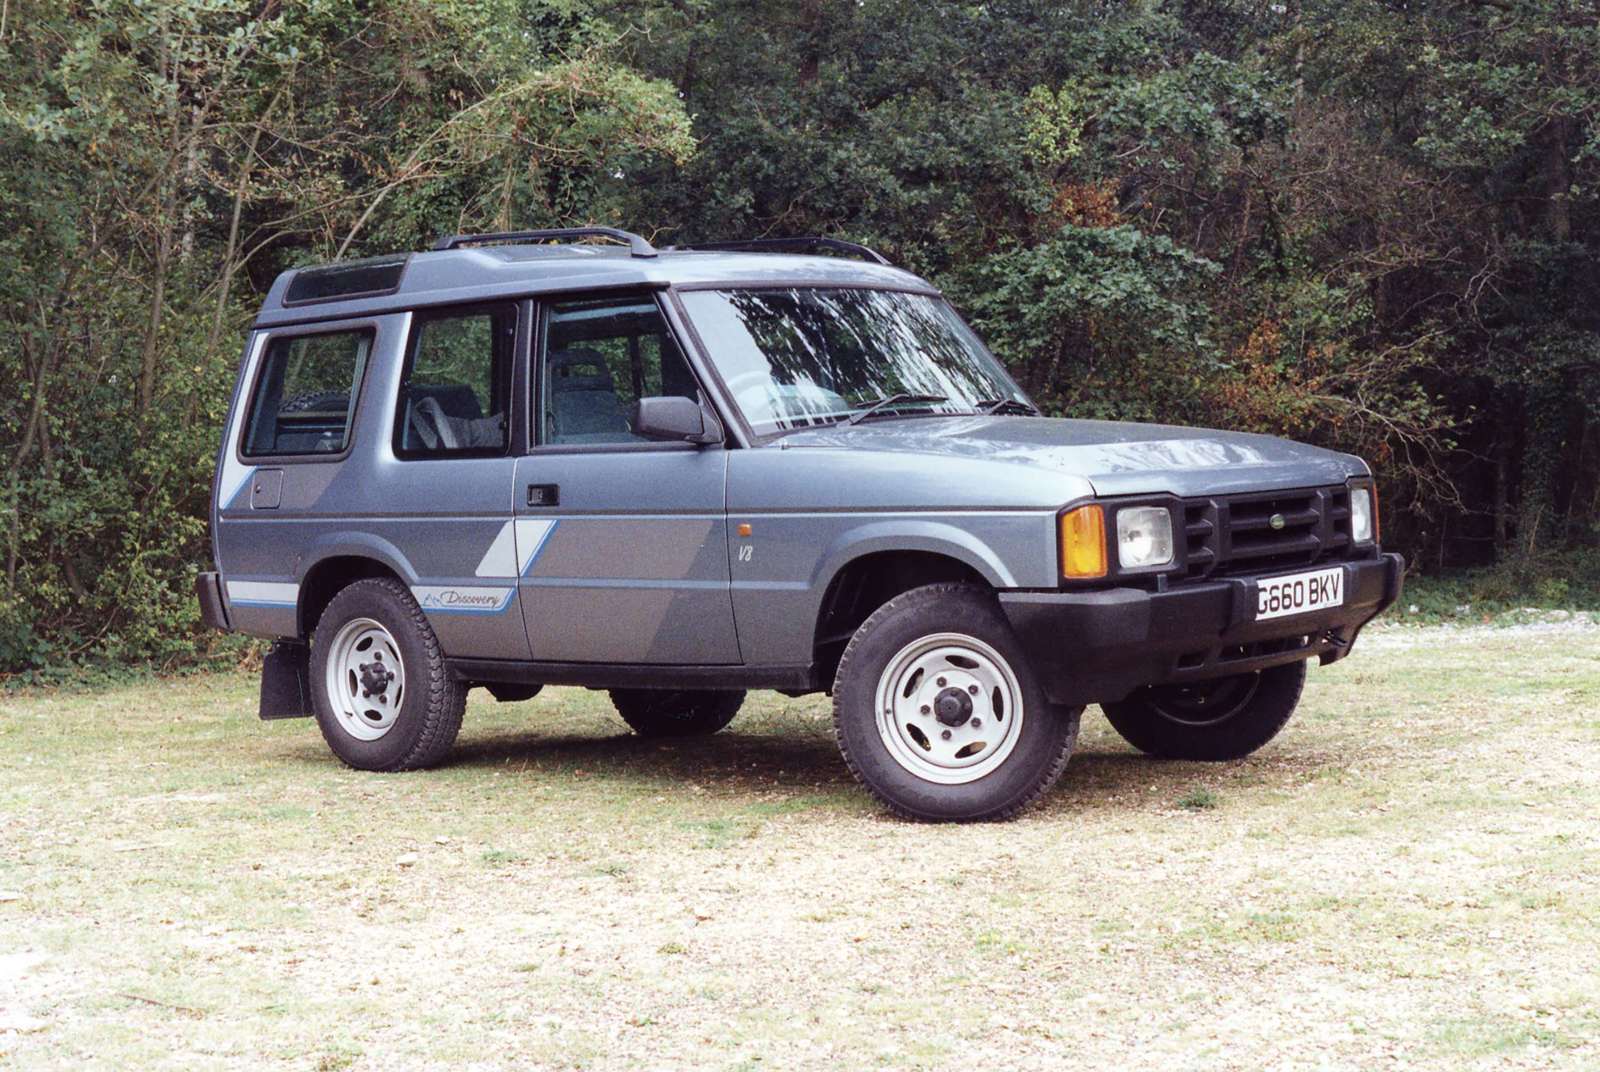 Celebrating 30 of the Land Rover Discovery